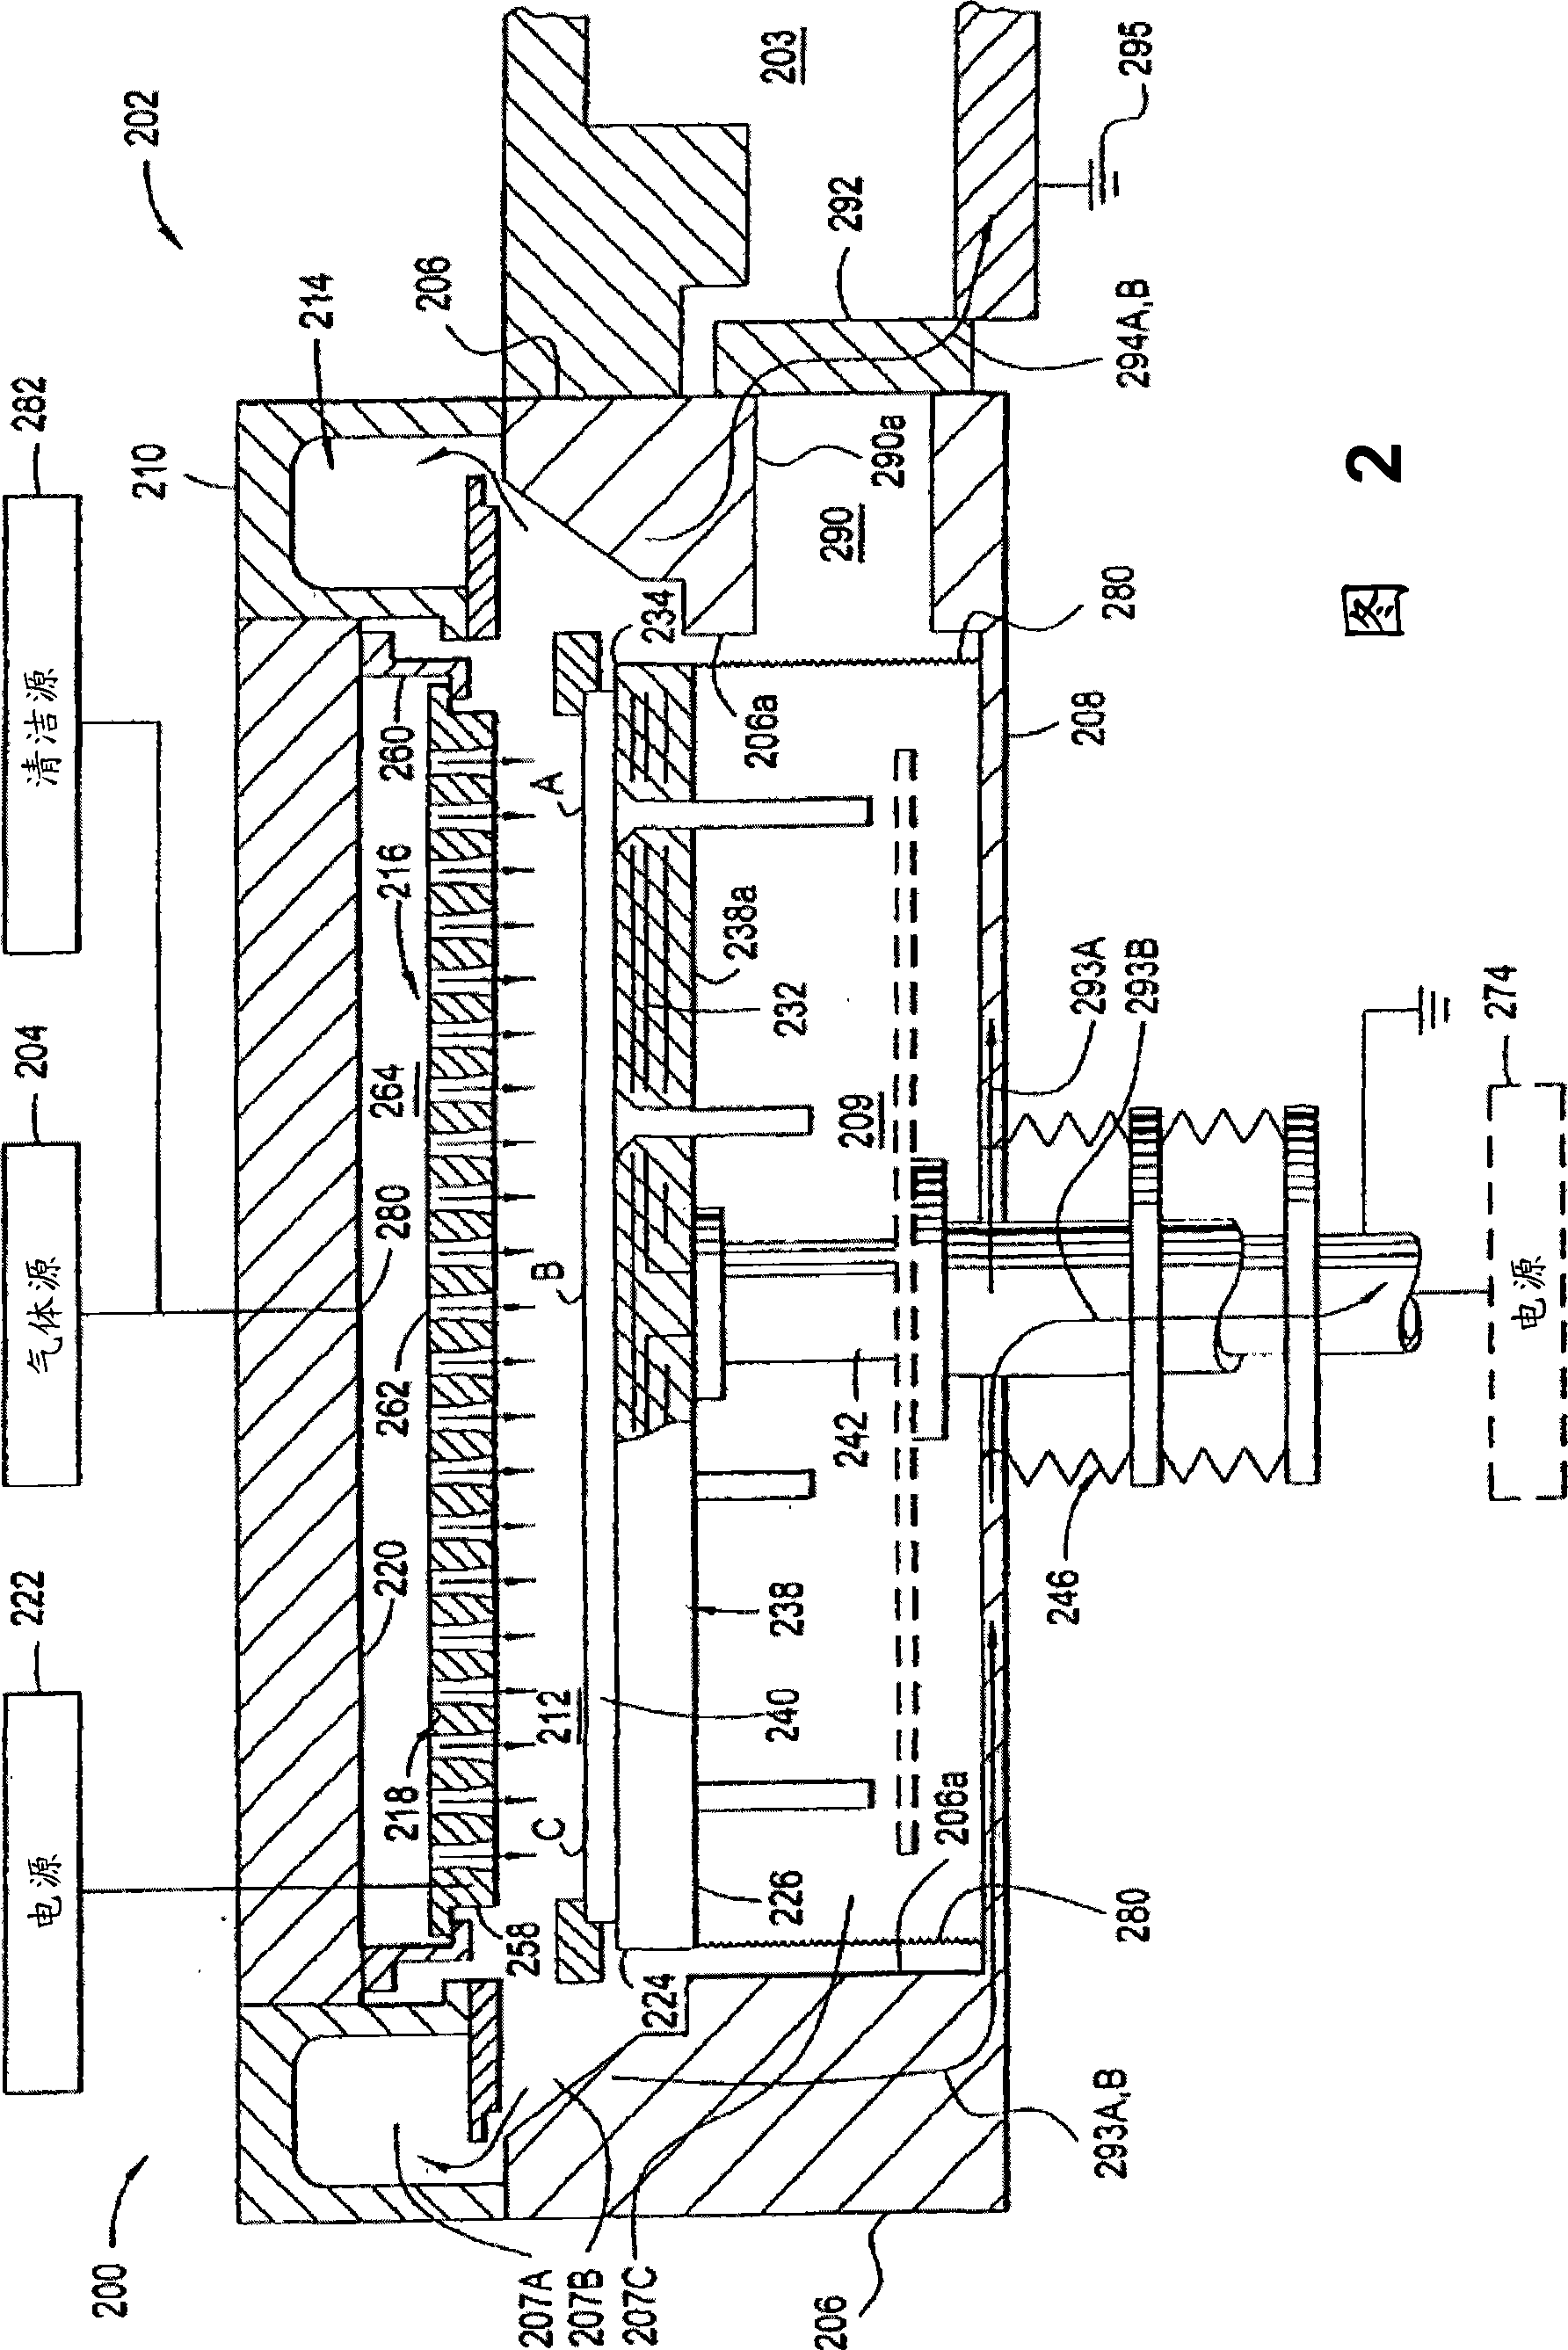 Method and apparatus for improving uniformity of large-area substrates